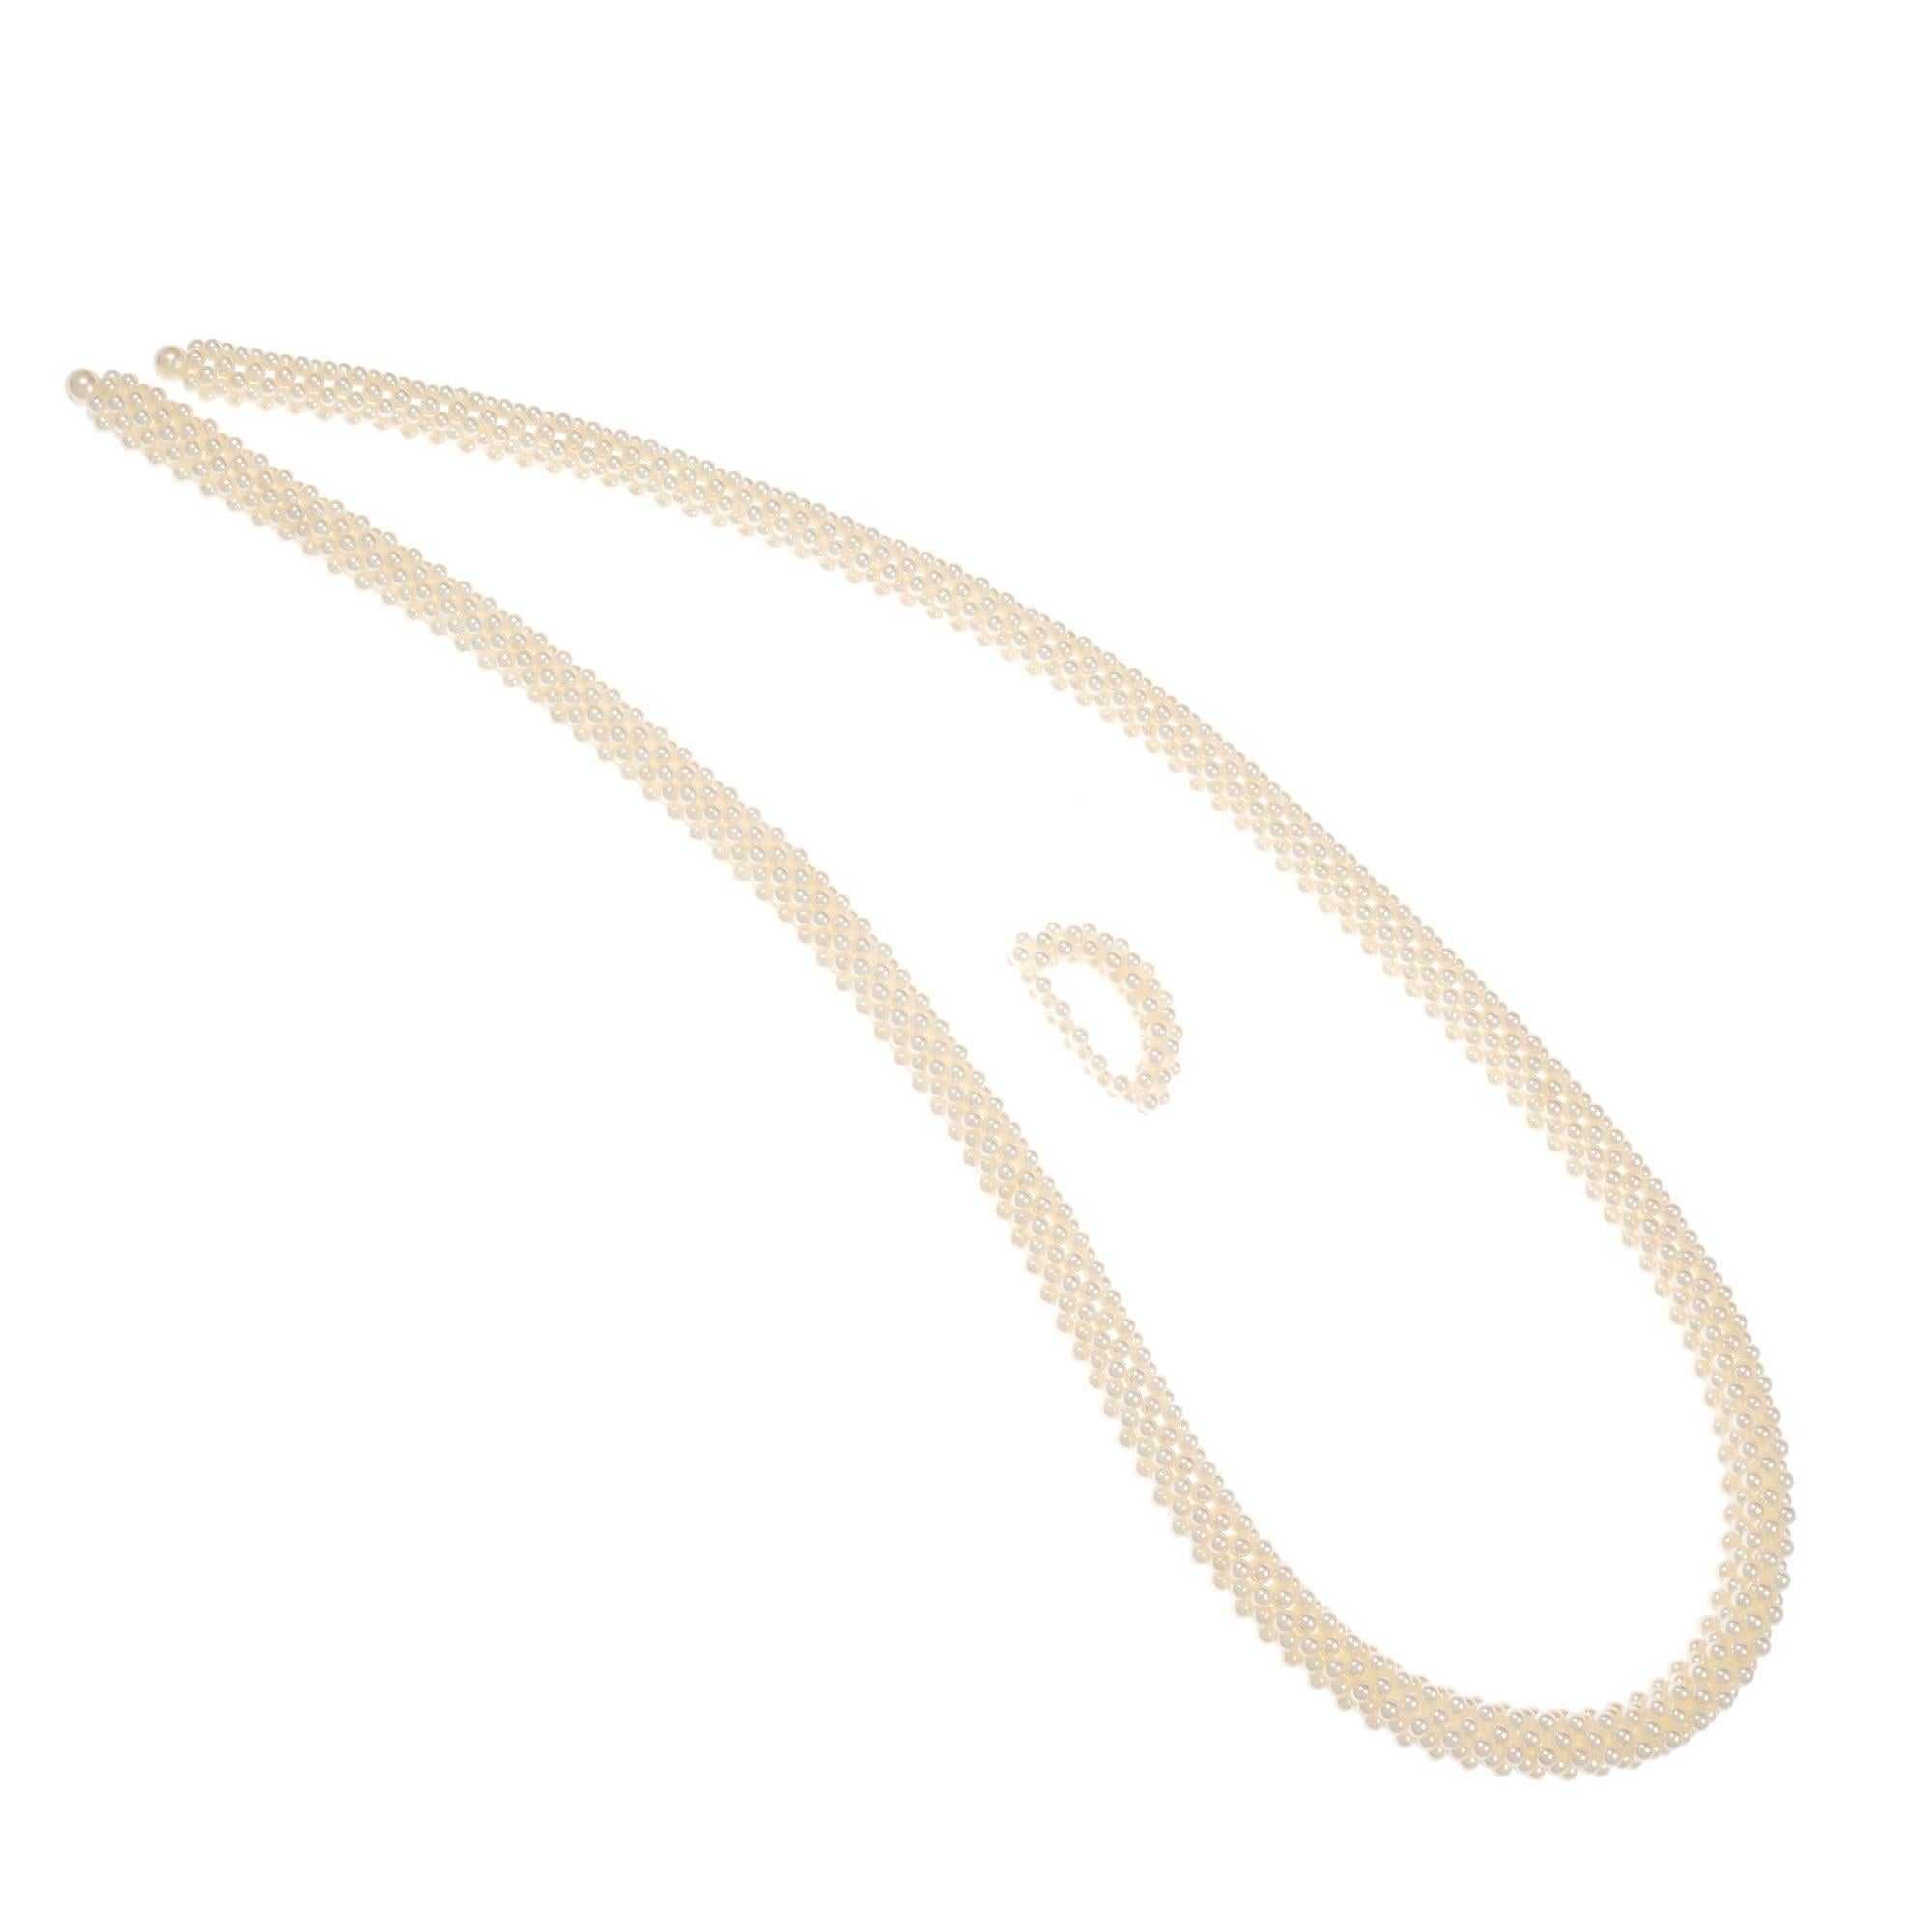 Mikimoto Japanese Akoya cultured Pearl unusual necklace. 3-D 10 row “Y” style 32 inch necklace with woven pearl adjustable slide.

1523 Japanese Akoya cultured Pearls, 3.4mm, color A+
2 Japanese Akoya cultured Pearls, 6.5 – 7mm, color A+
Mikimoto